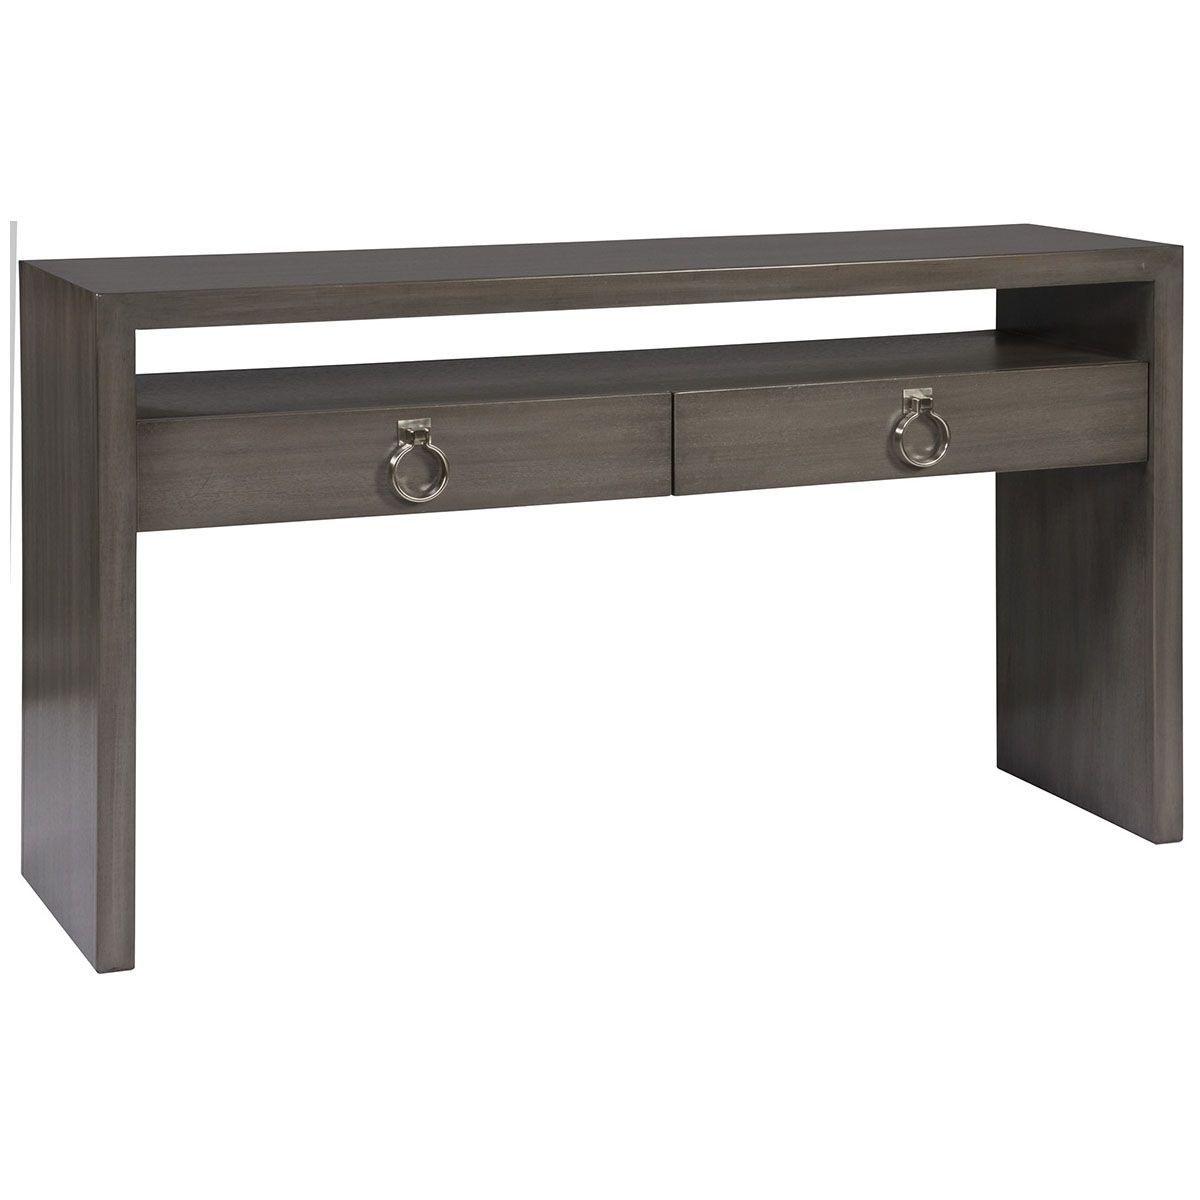 Vanguard Furniture Margo Console W349s Lg | Vanguad Furniture Intended For Parsons Black Marble Top &amp; Dark Steel Base 48x16 Console Tables (View 8 of 30)